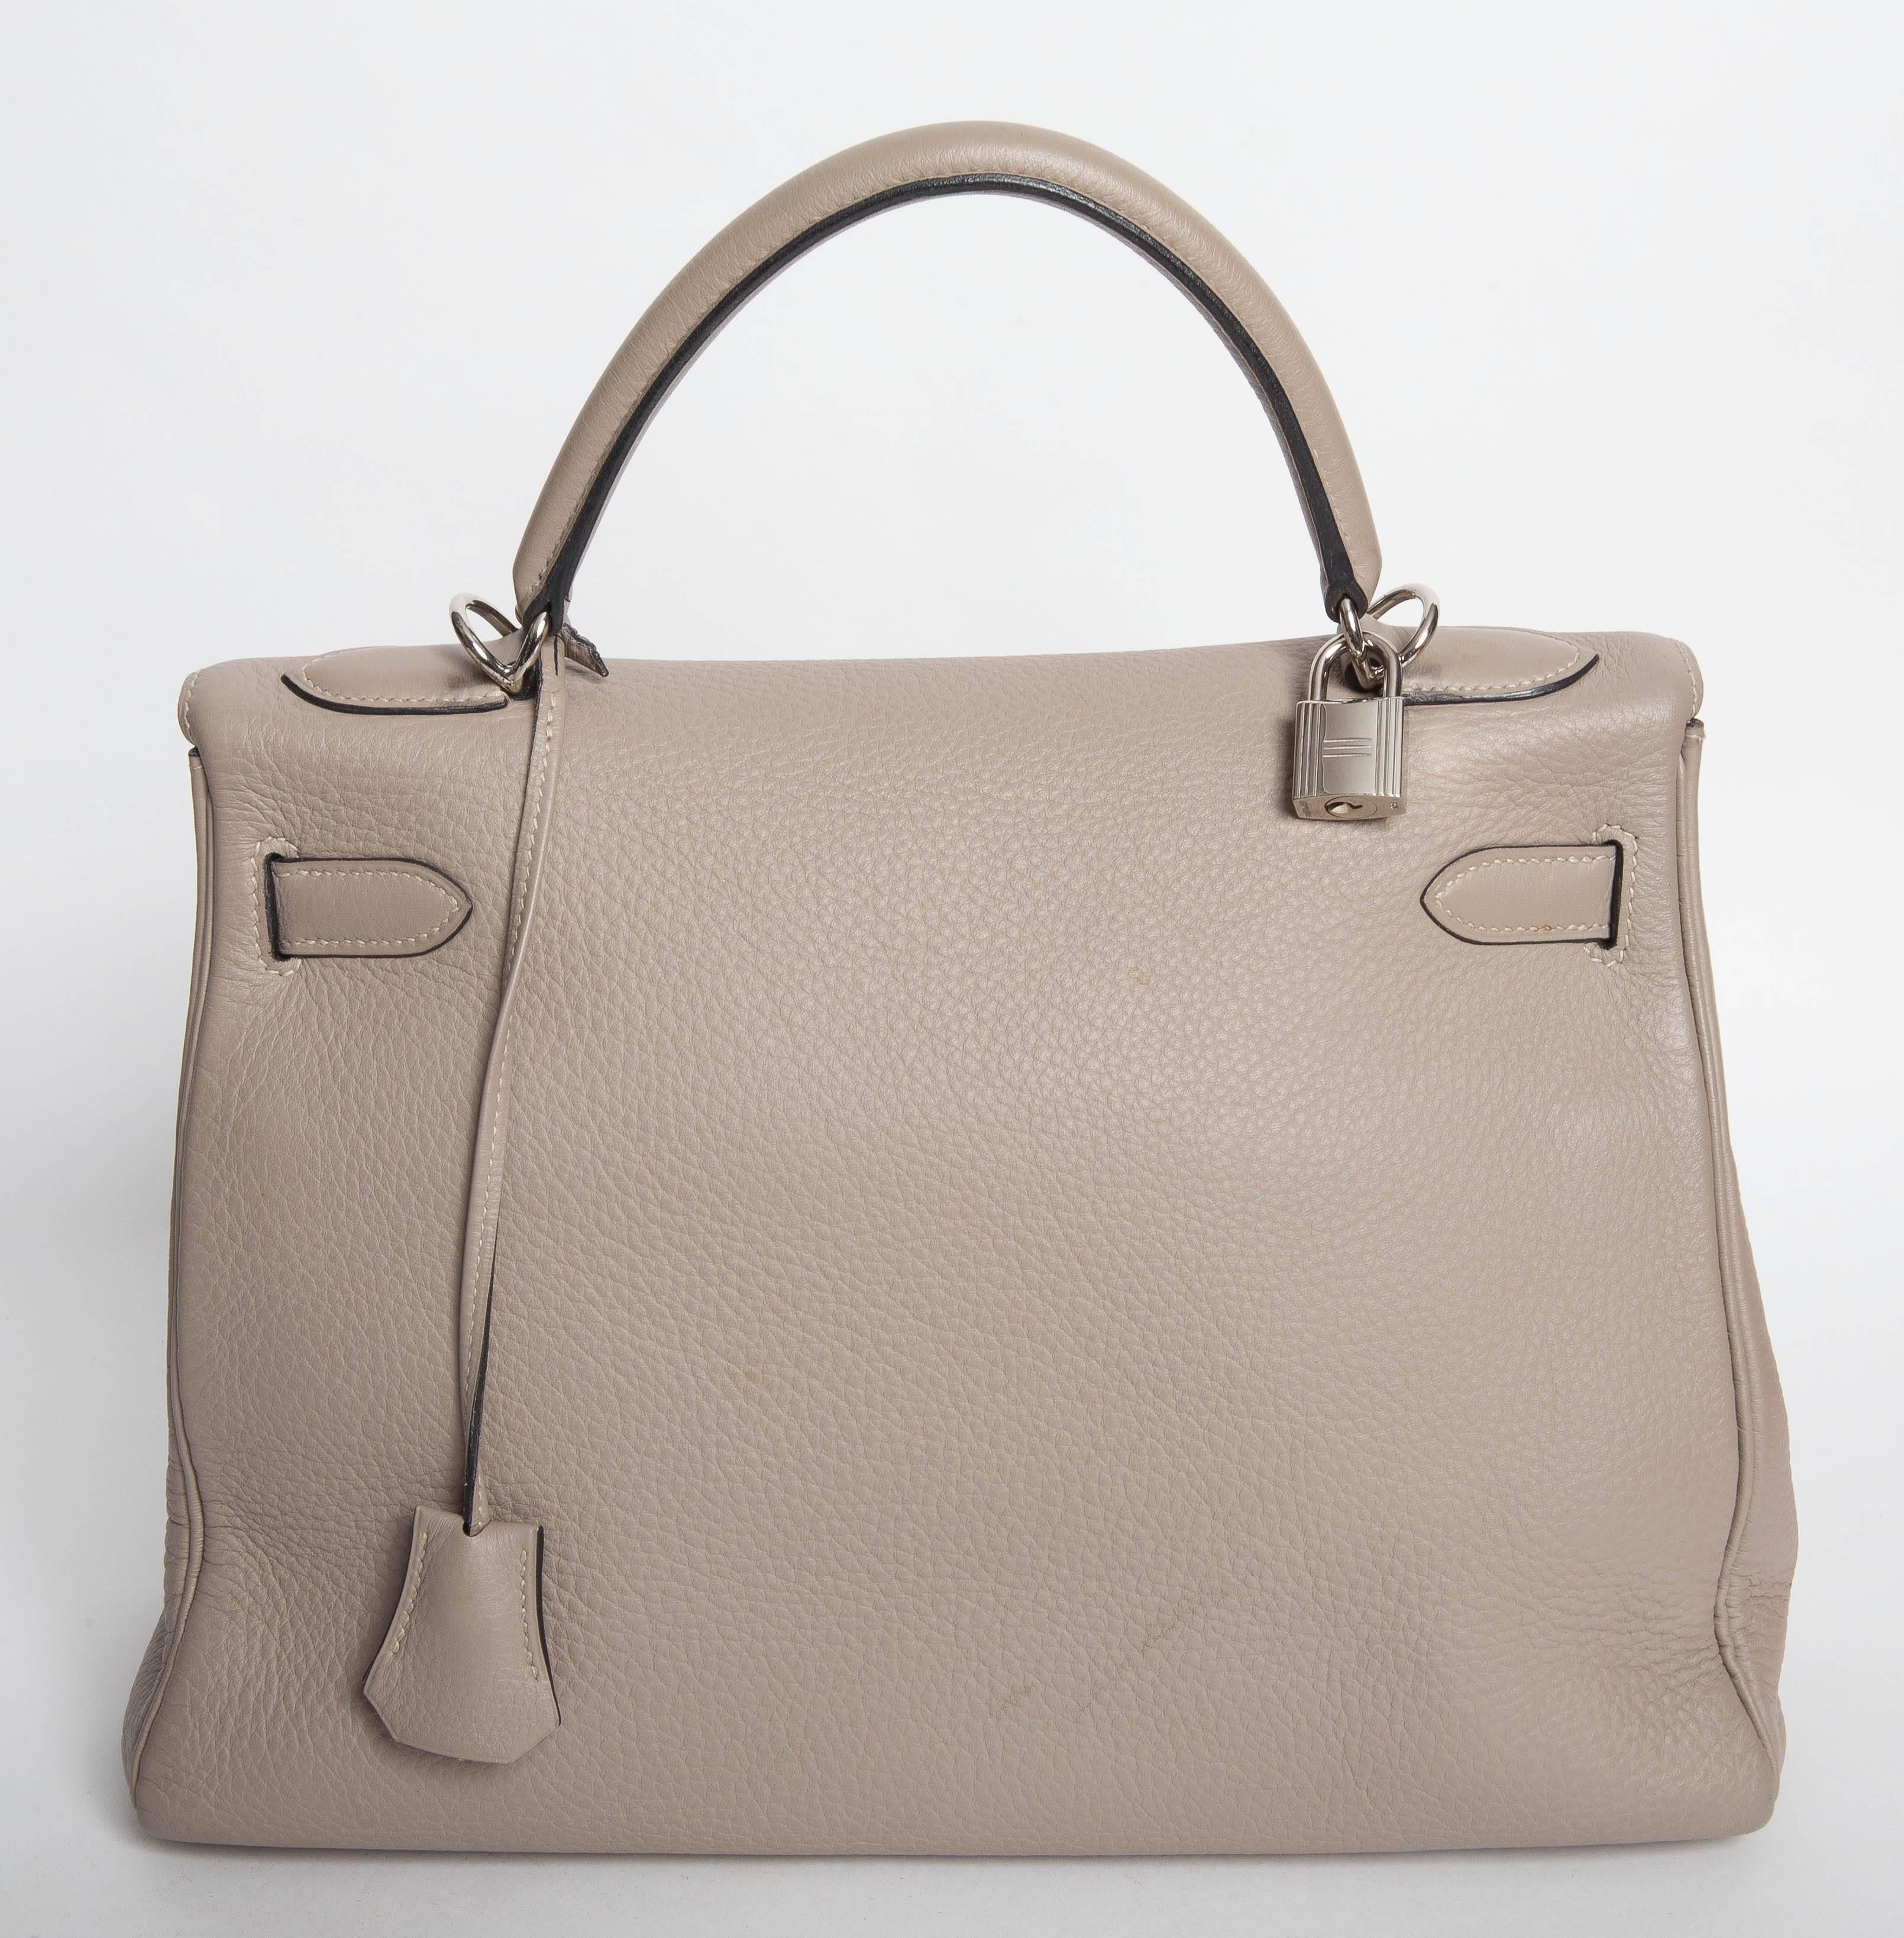 This wonderful Hermes Kelly is in excellent condition with the exception of a few scratches to the leather. One scratch on the rear of the bag may require a spa treatment but we can not guarantee that it can be removed. Corners are in excellent